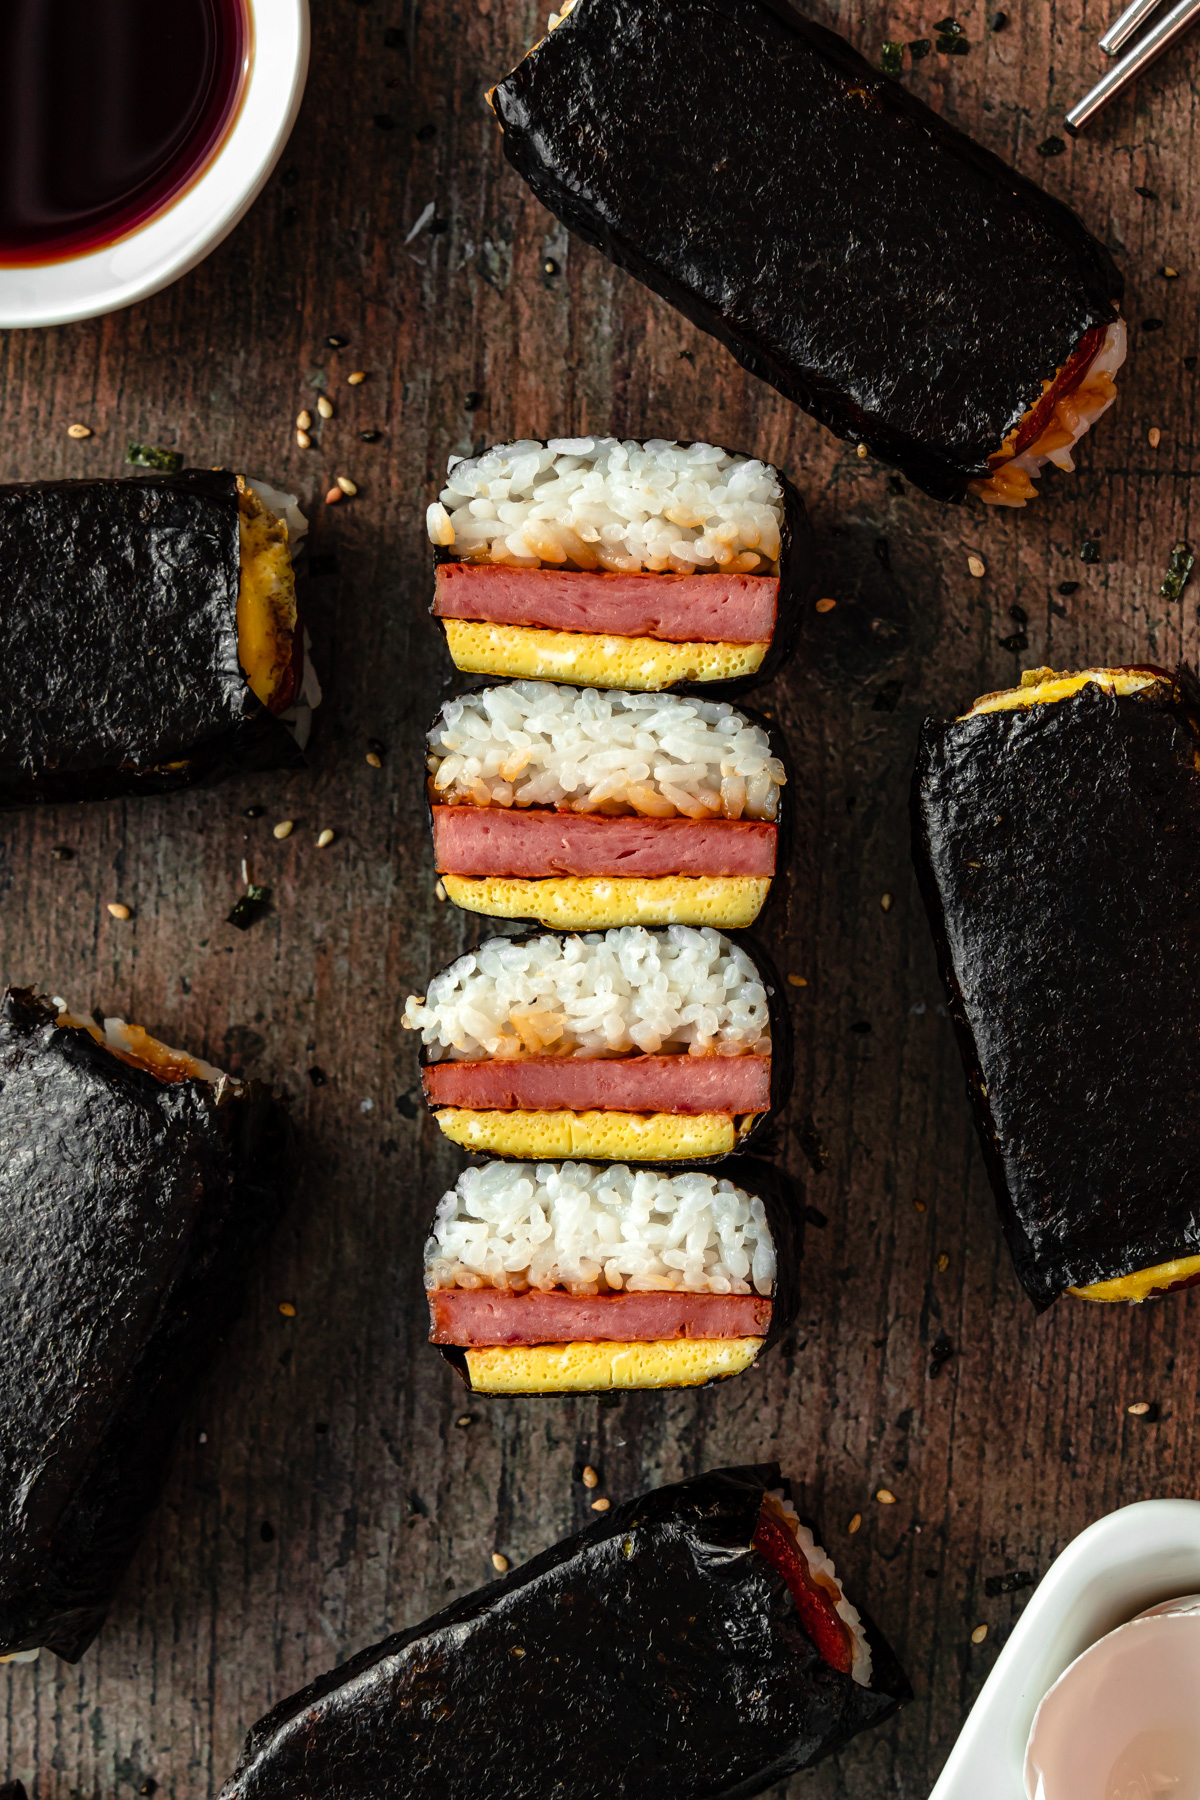 spam and egg musubi cut in half surrounded by musubis.